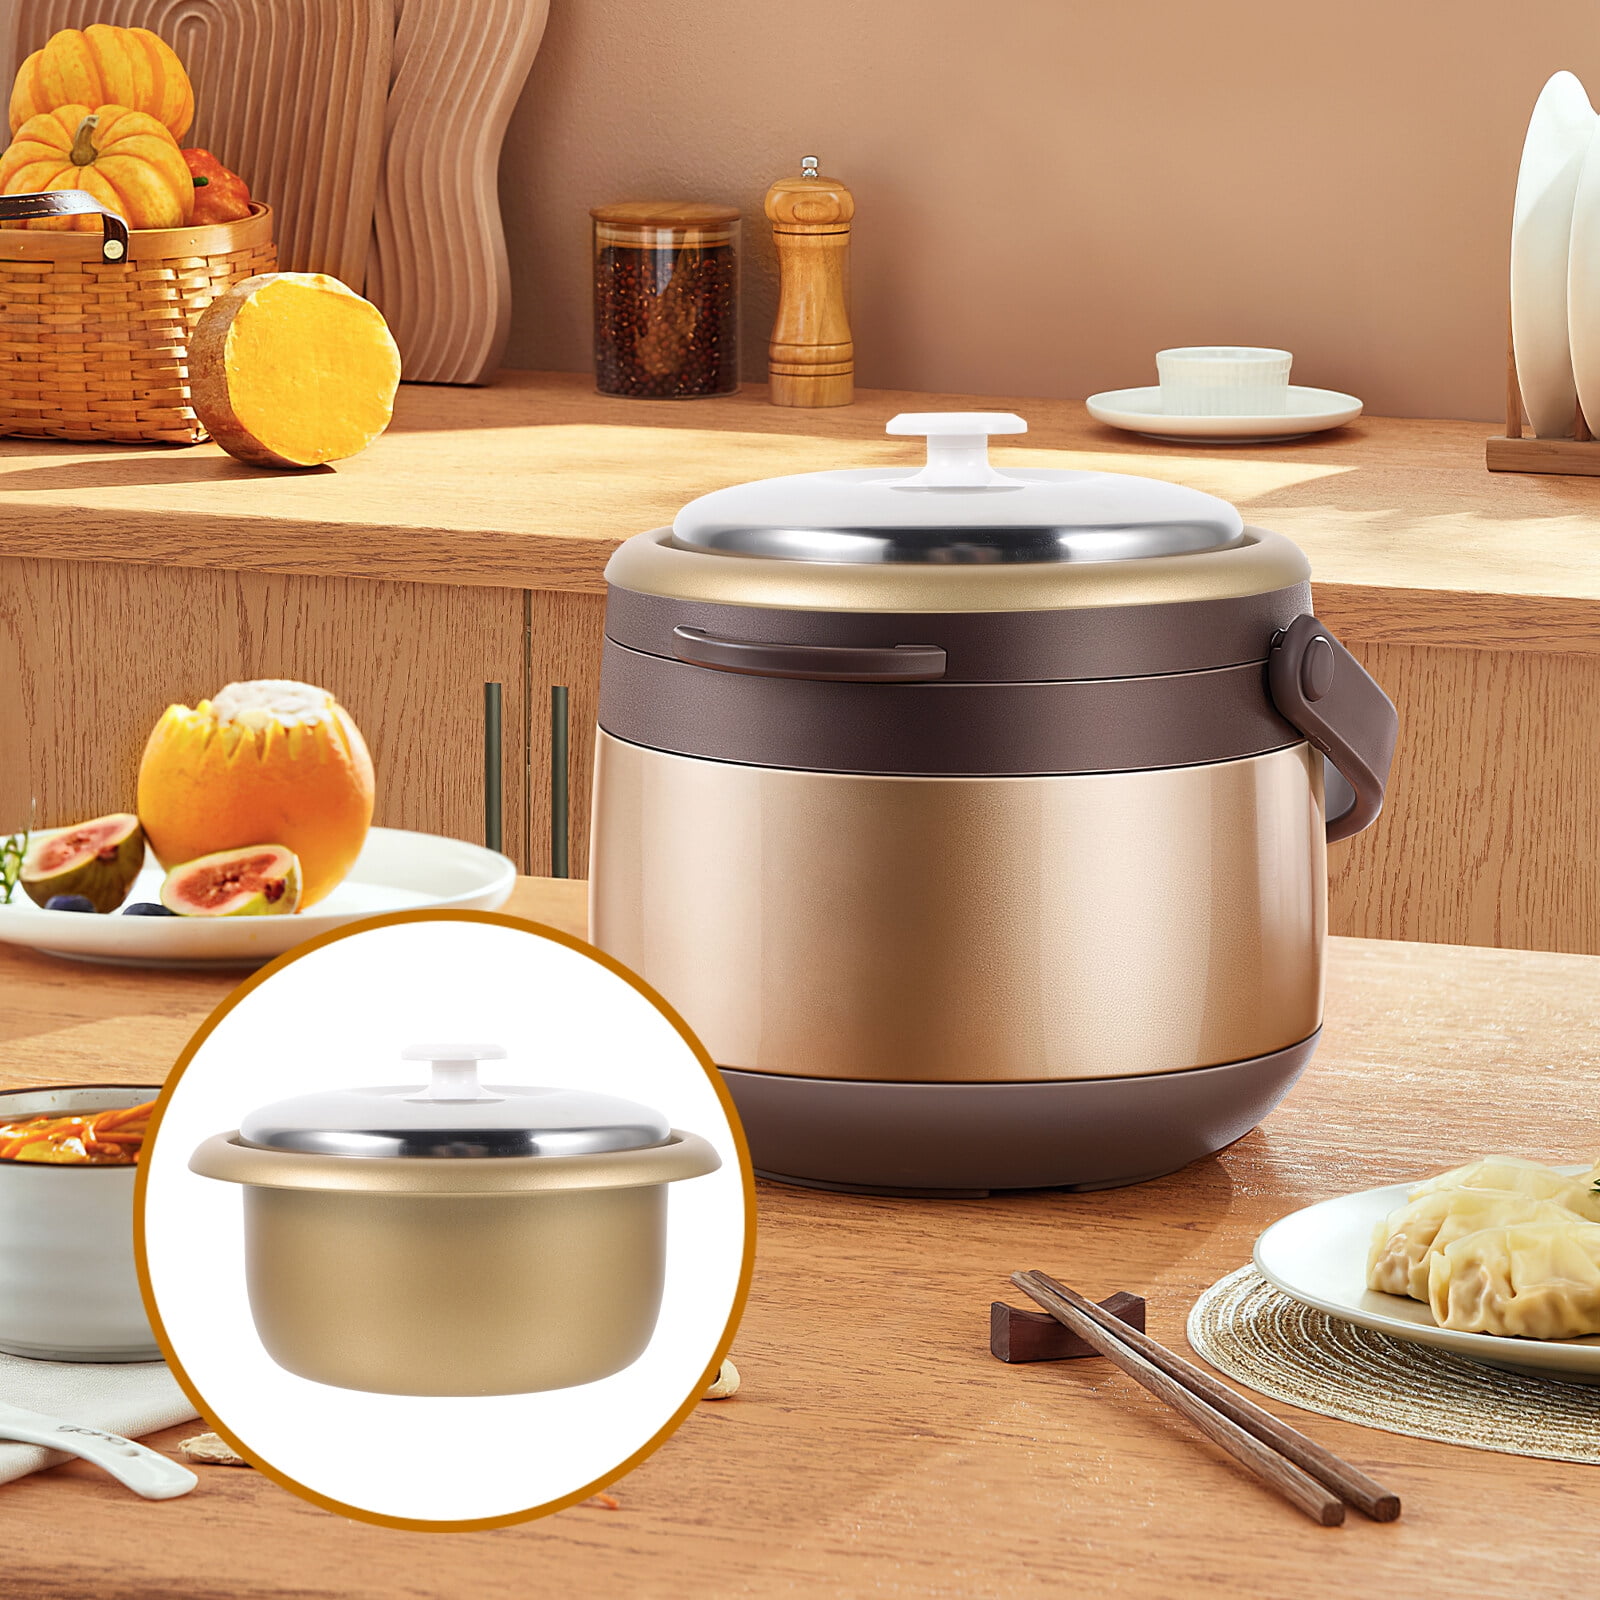 MICRO ACL rice cooker with non-stick inner pan - 10 cups (uncooked rice)